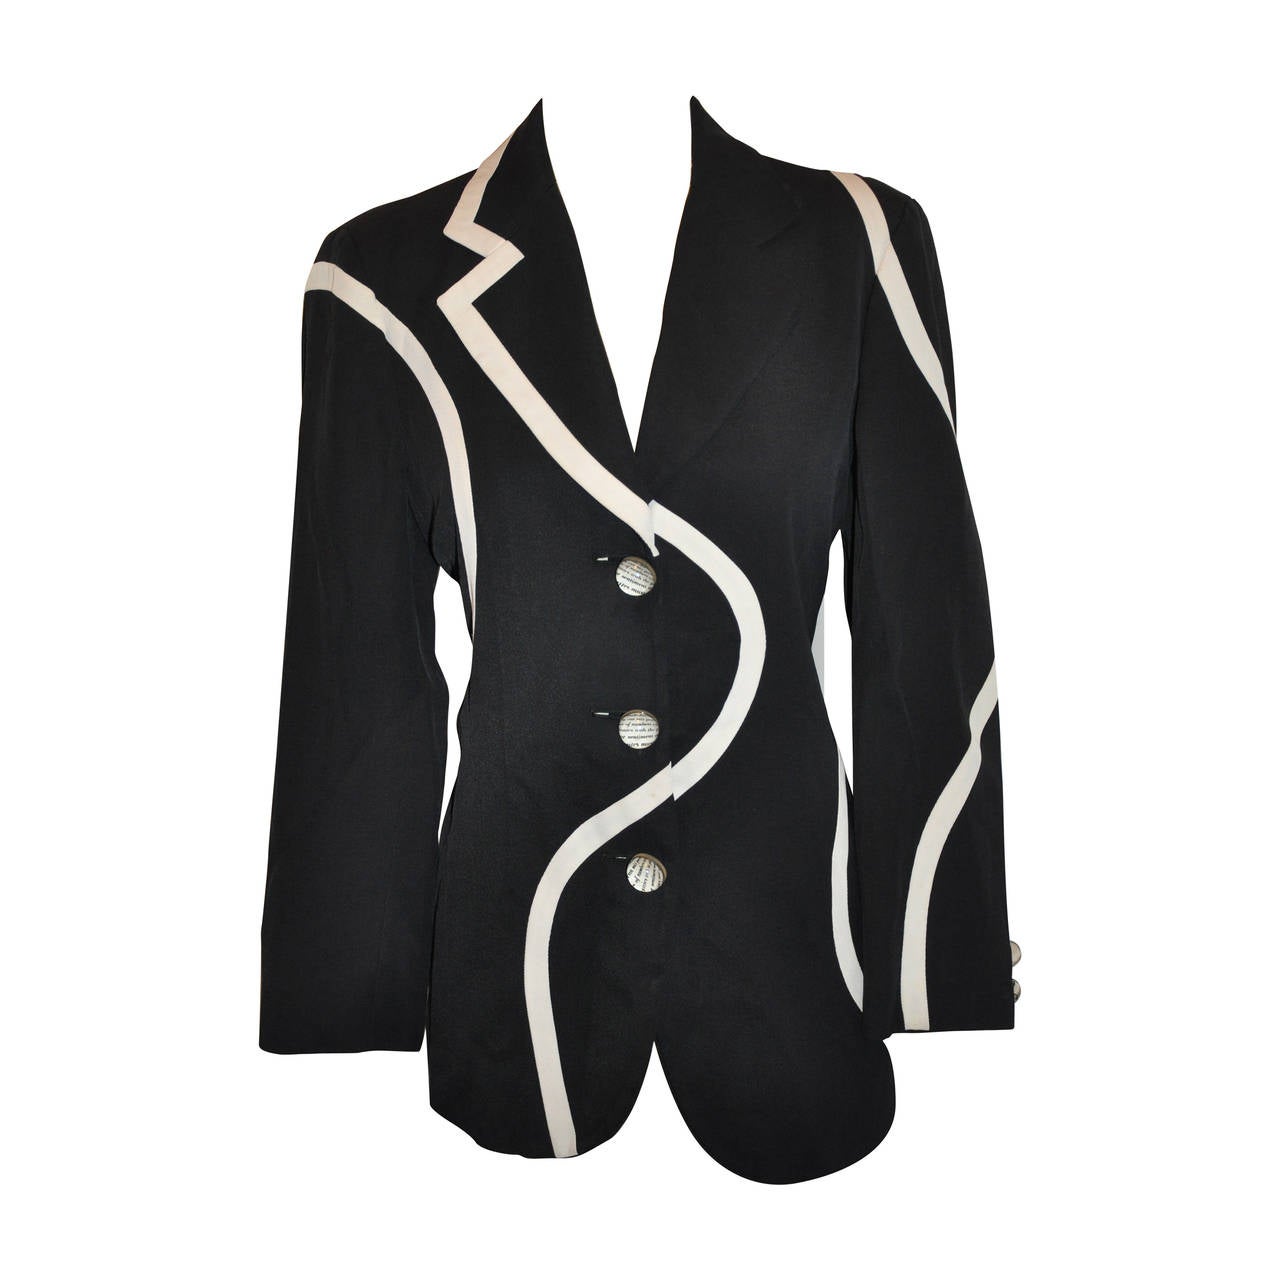 Moschino "Cheap & Chic" "Swirl" Black & White with Bubble Buttons Jacket For Sale